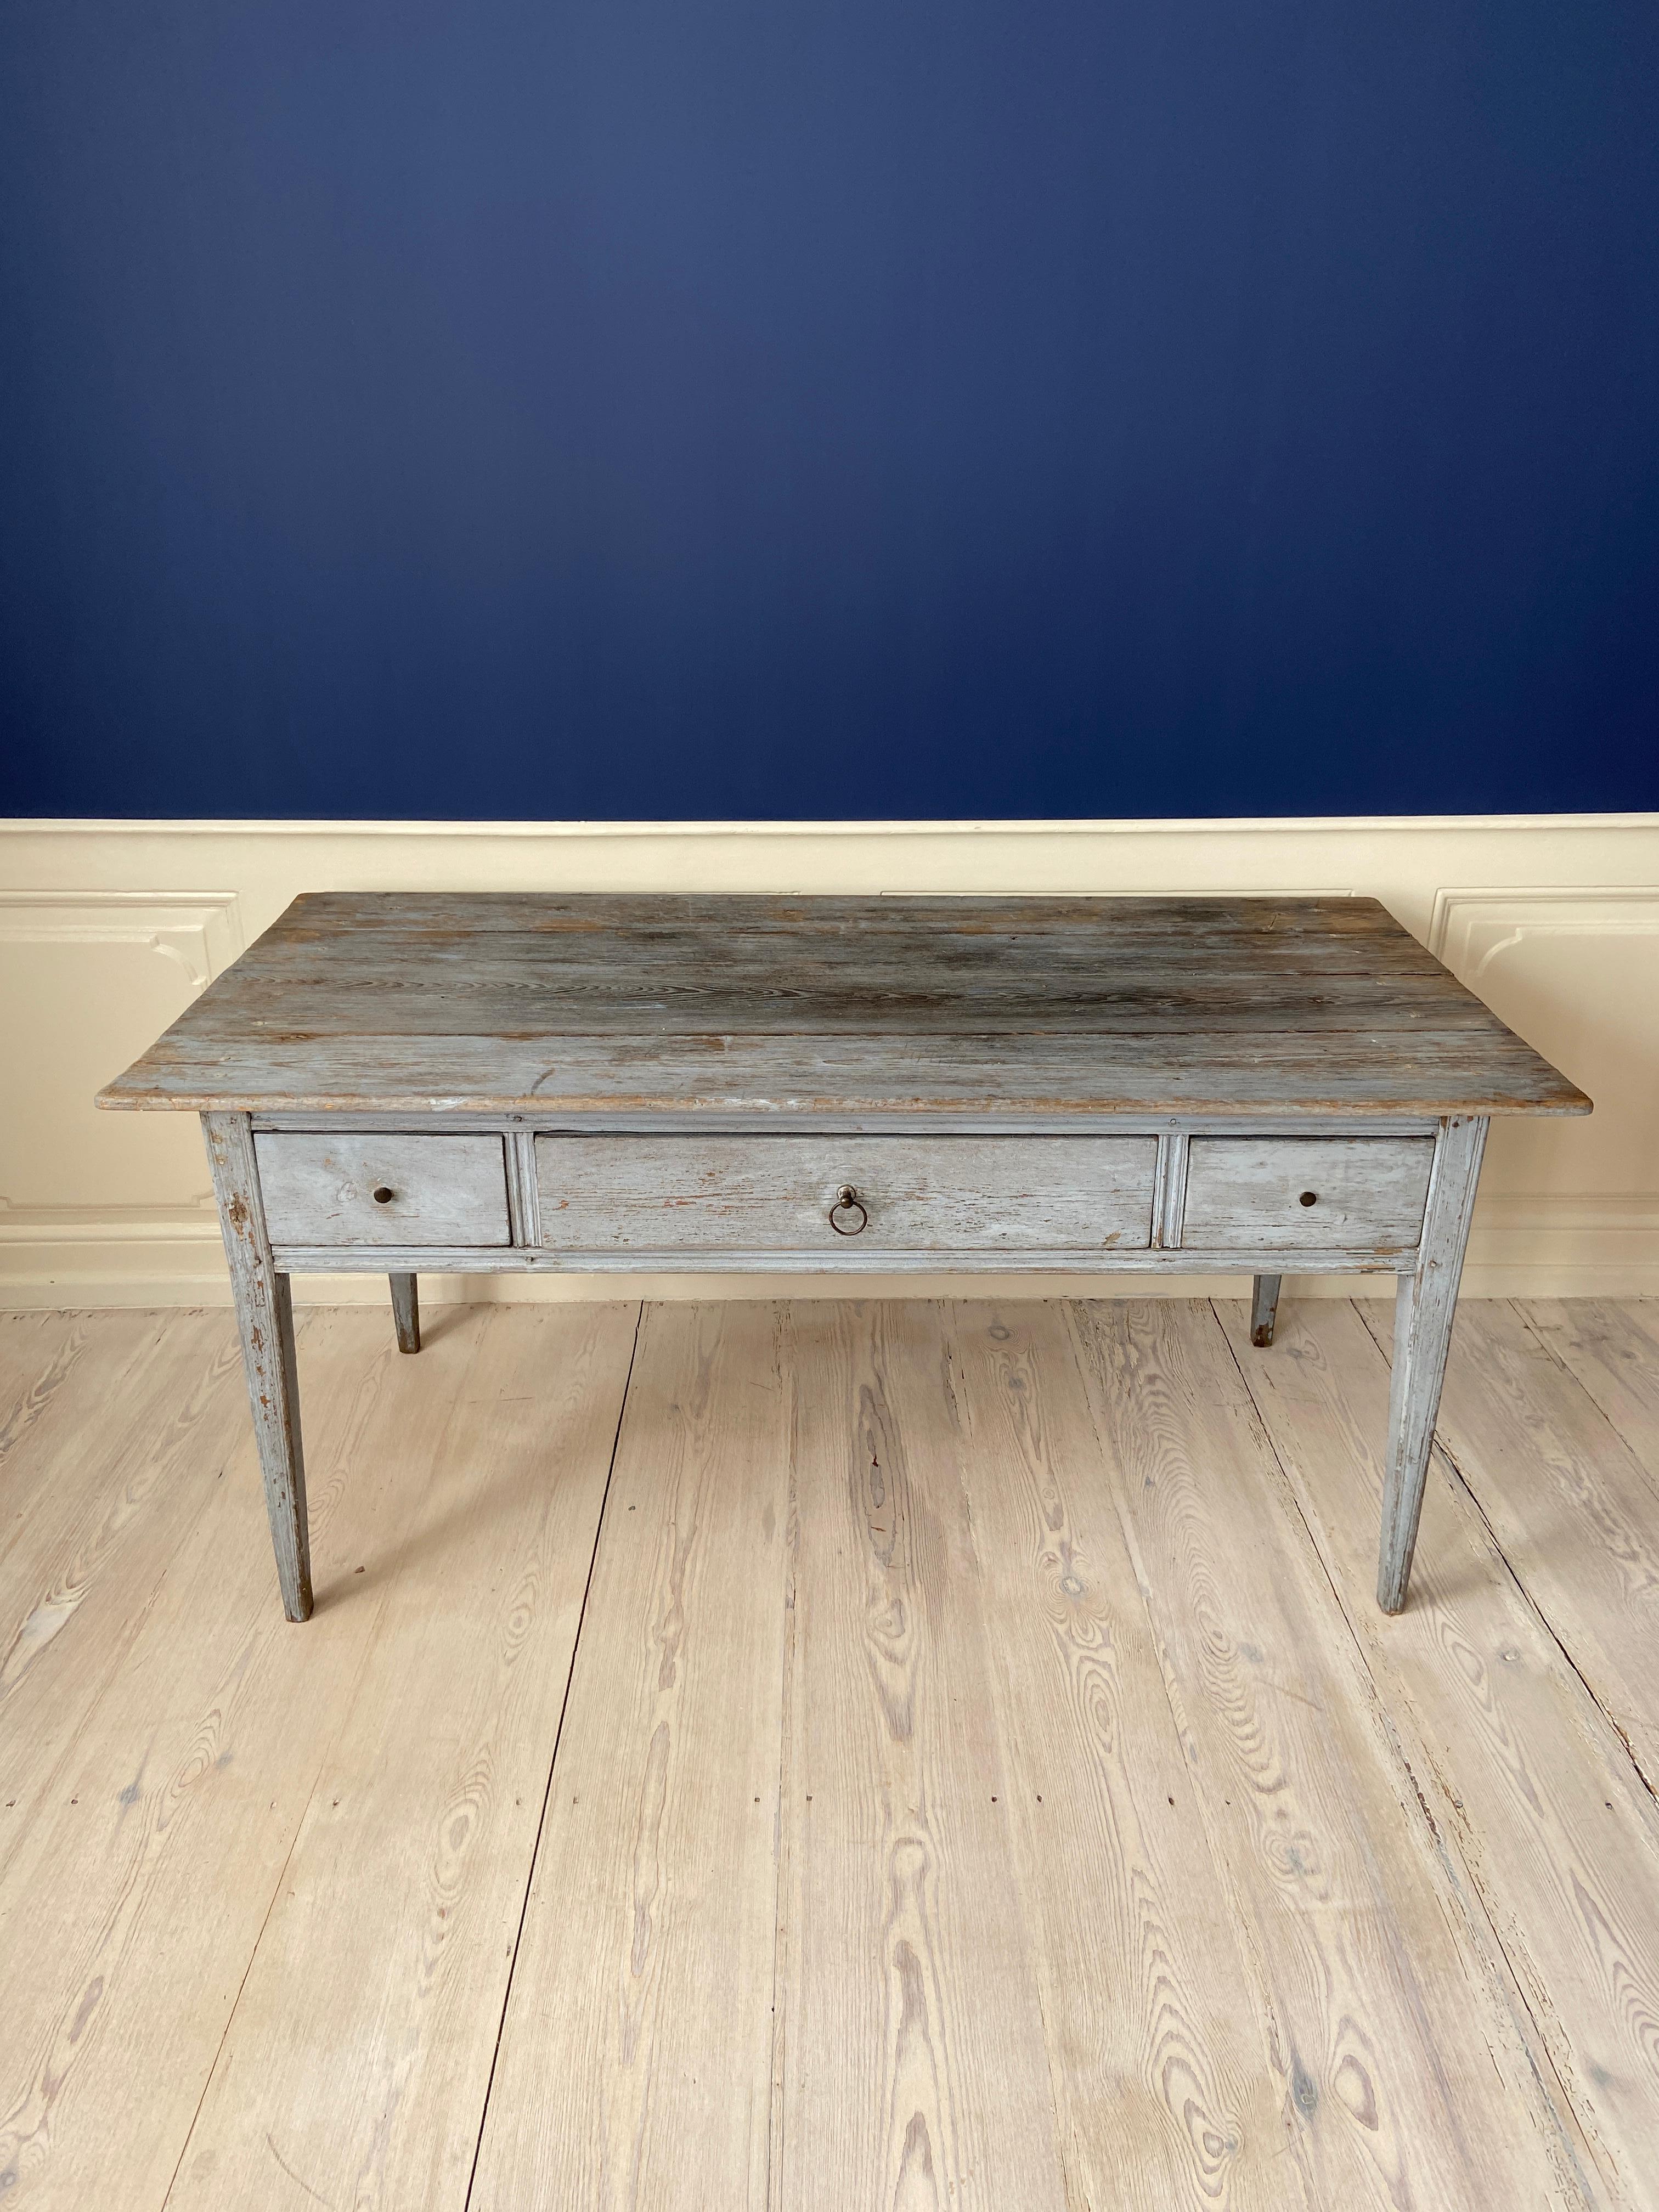 Swedish Vintage Folk Art Table in Pine with Three Drawers, Sweden, Early 19th-Century For Sale